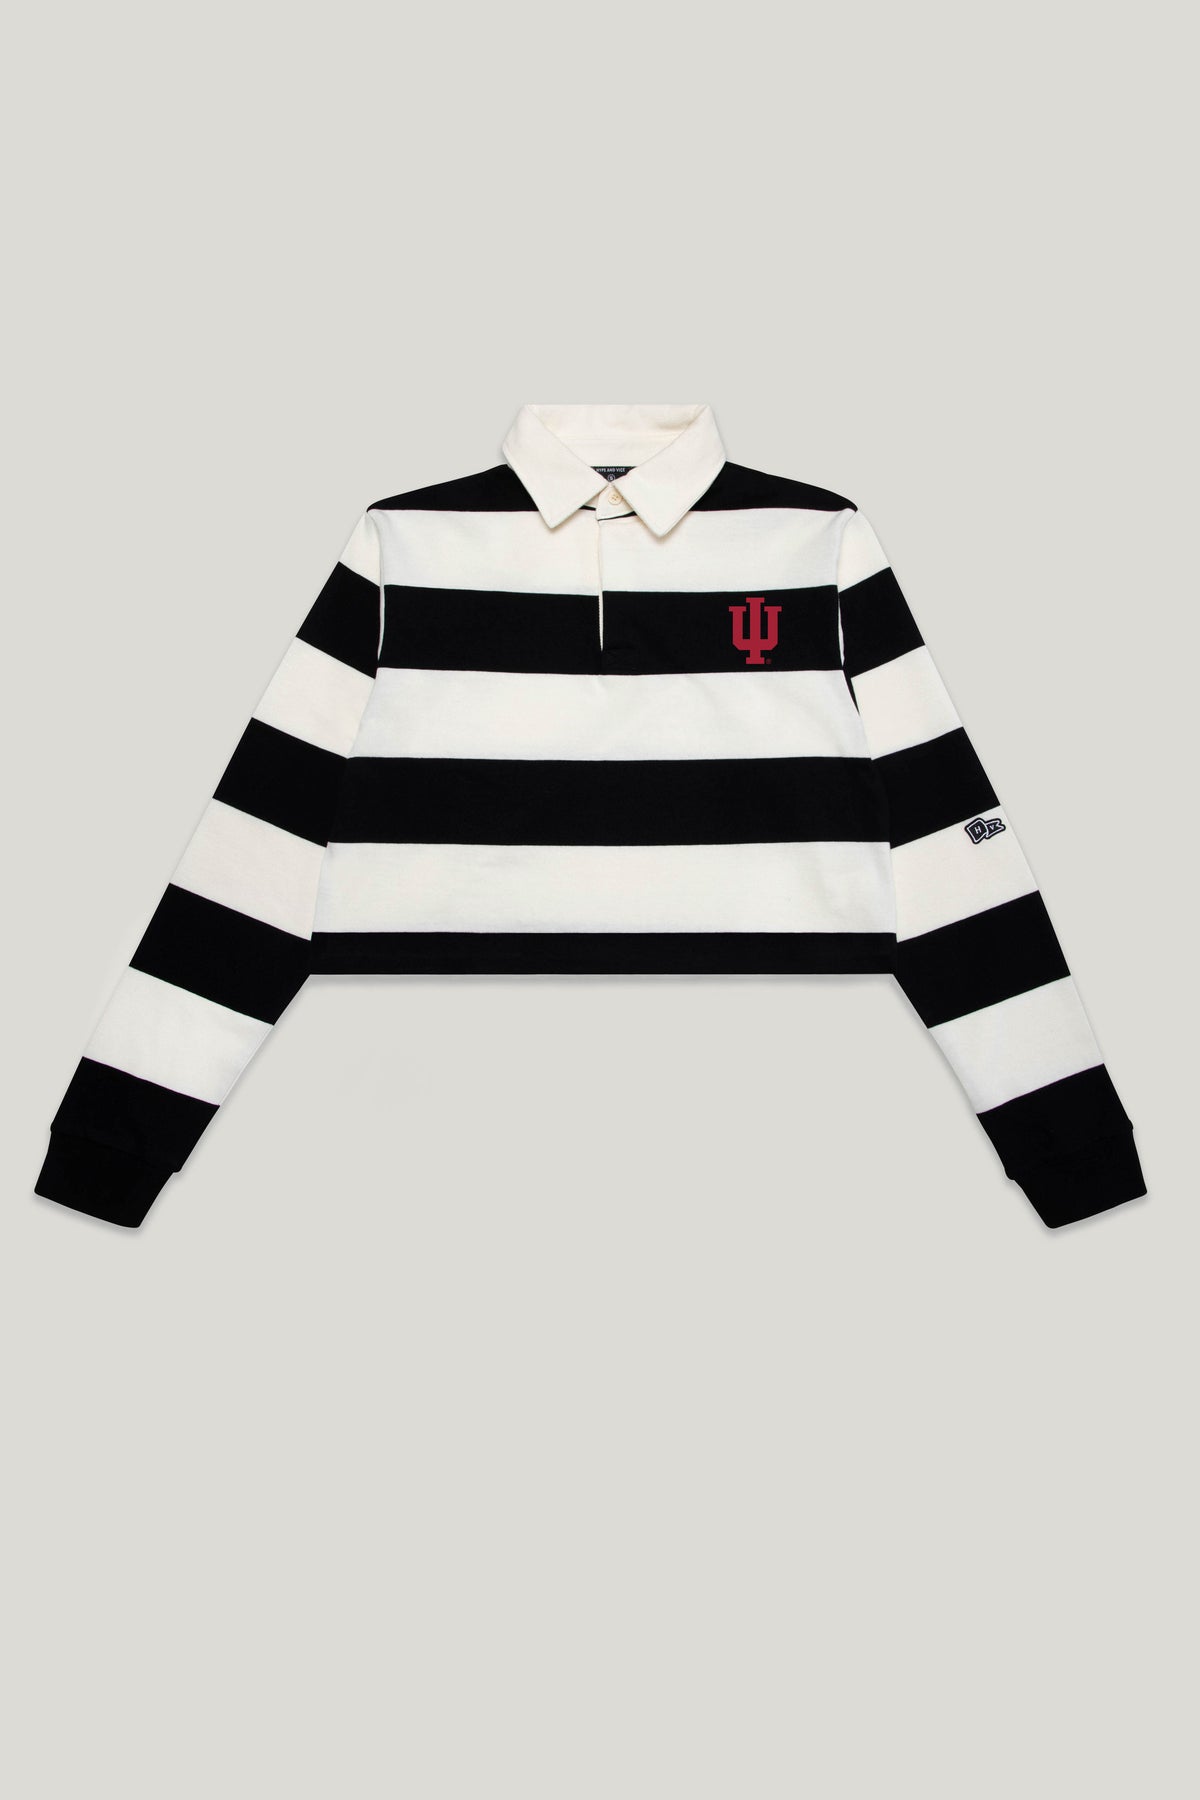 Indiana Rugby Top